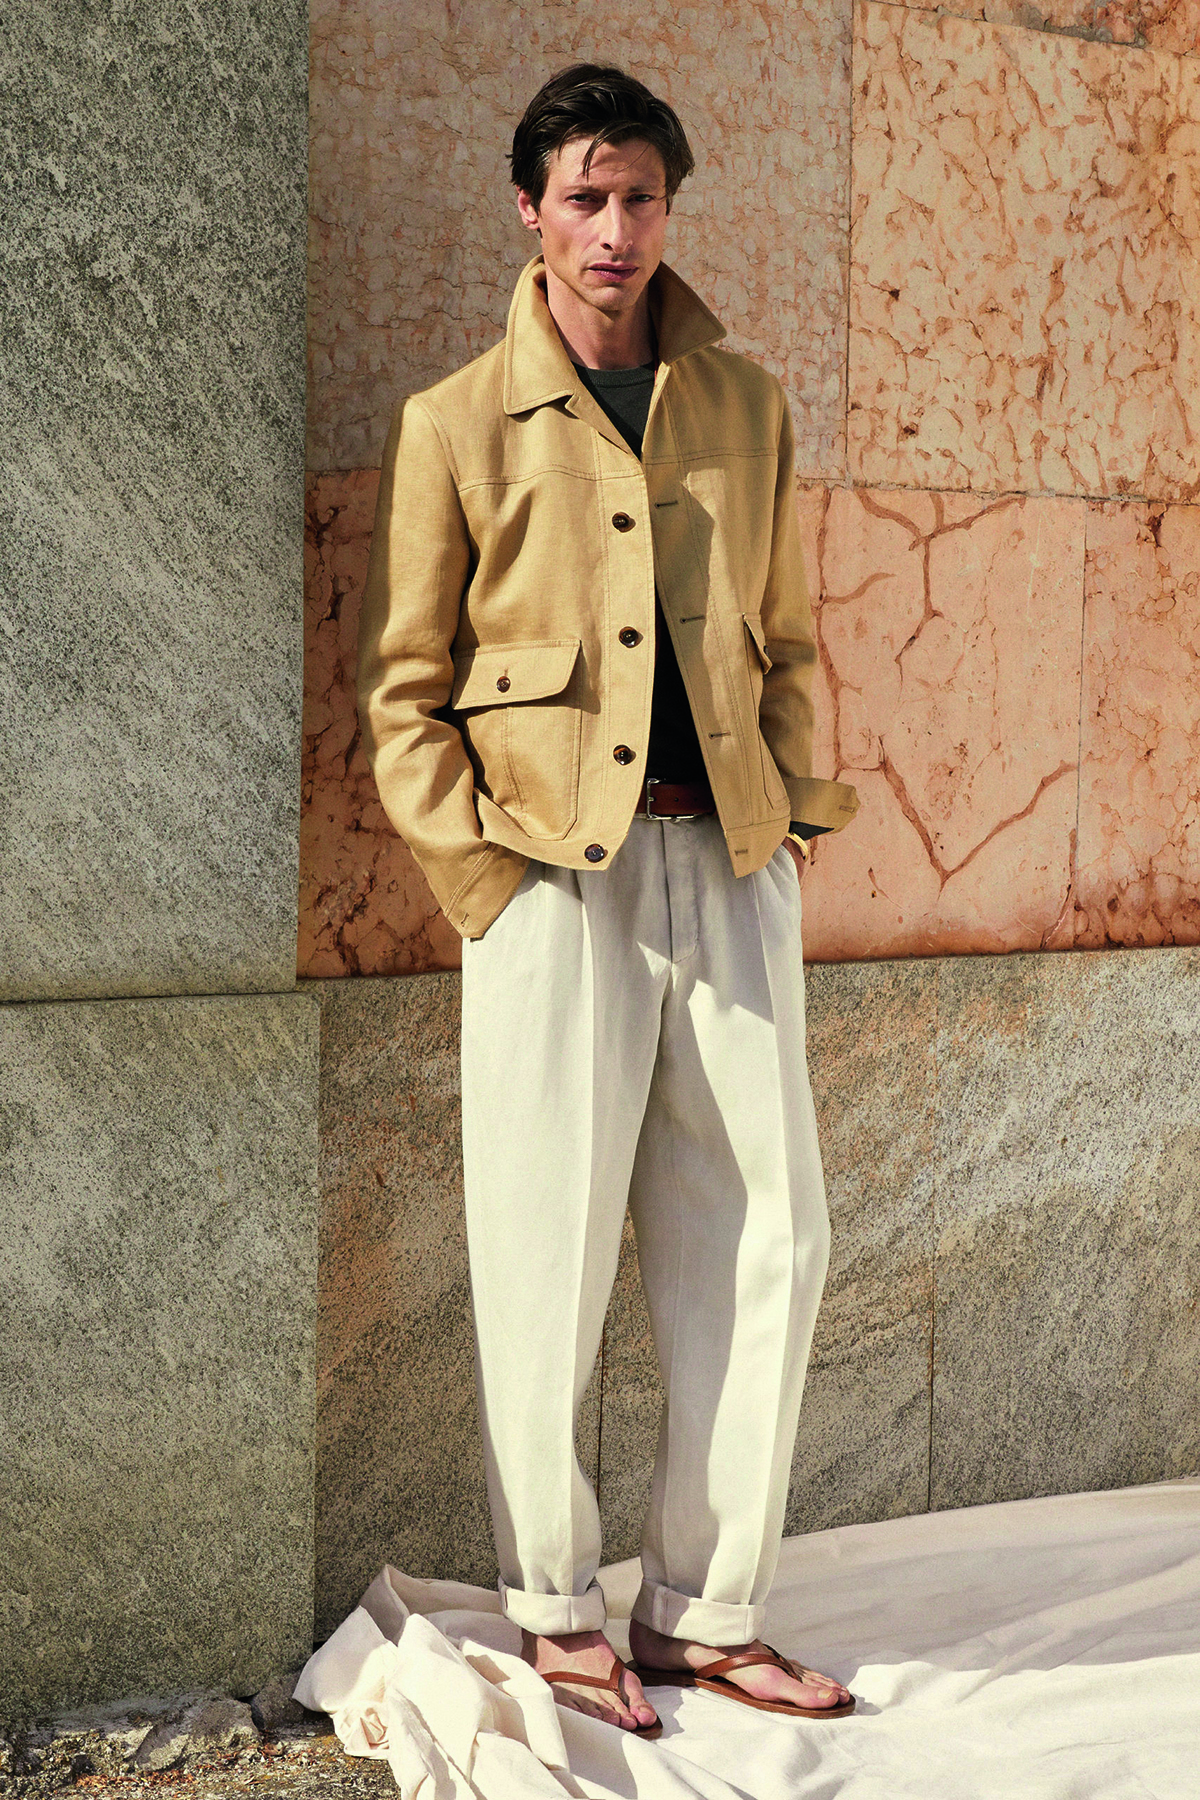 A man wearing white trousers and a cream jacket, standing by a stone wall